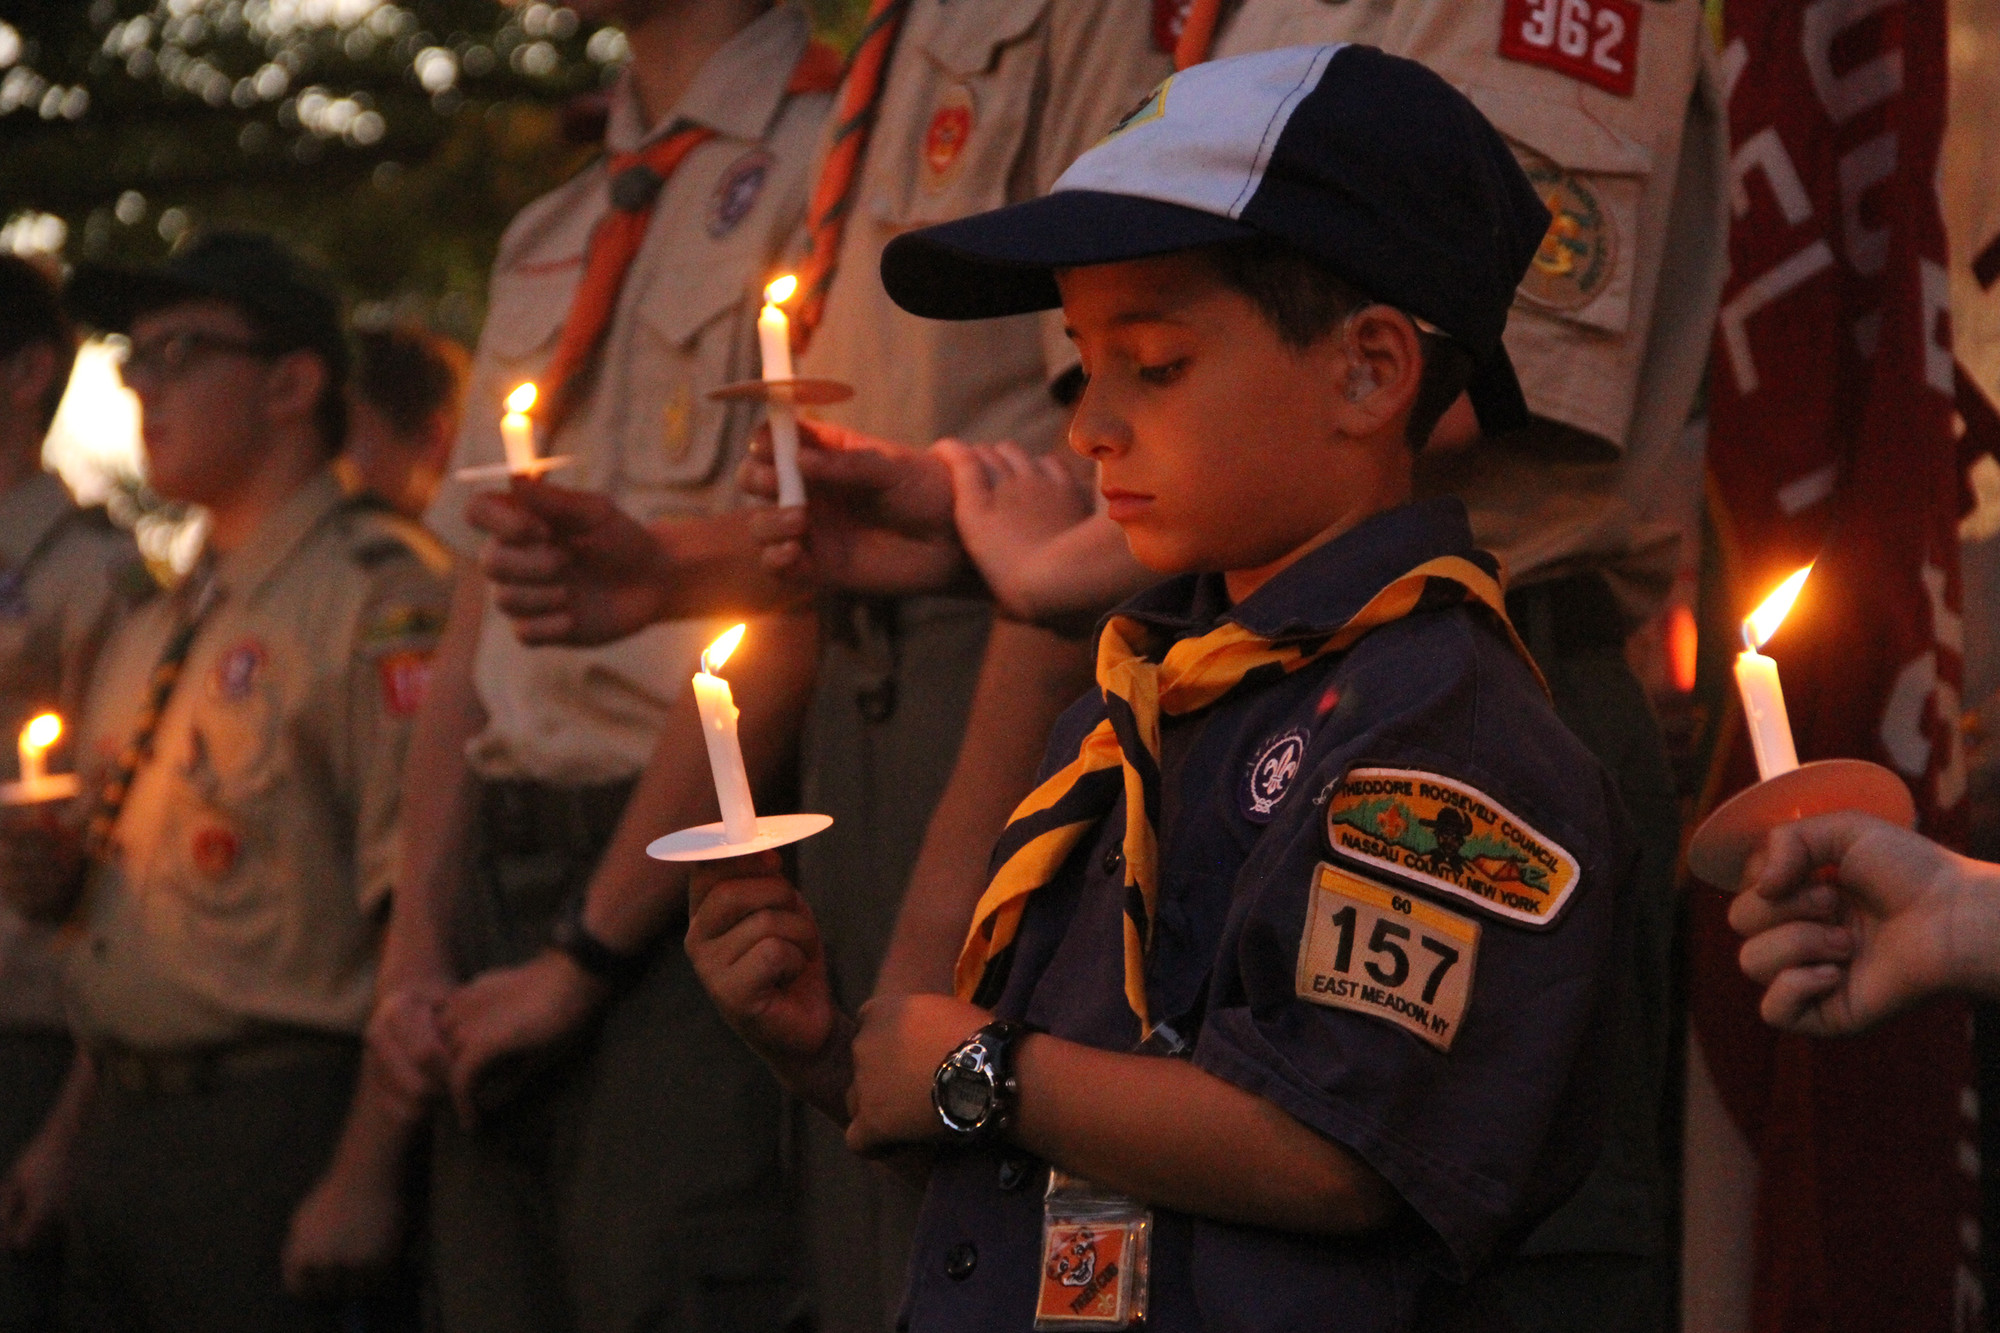 Aaron Schlectman of East Meadow Boy Scout Troop 157  stood solemnly at the community Sept. 11 ceremony.